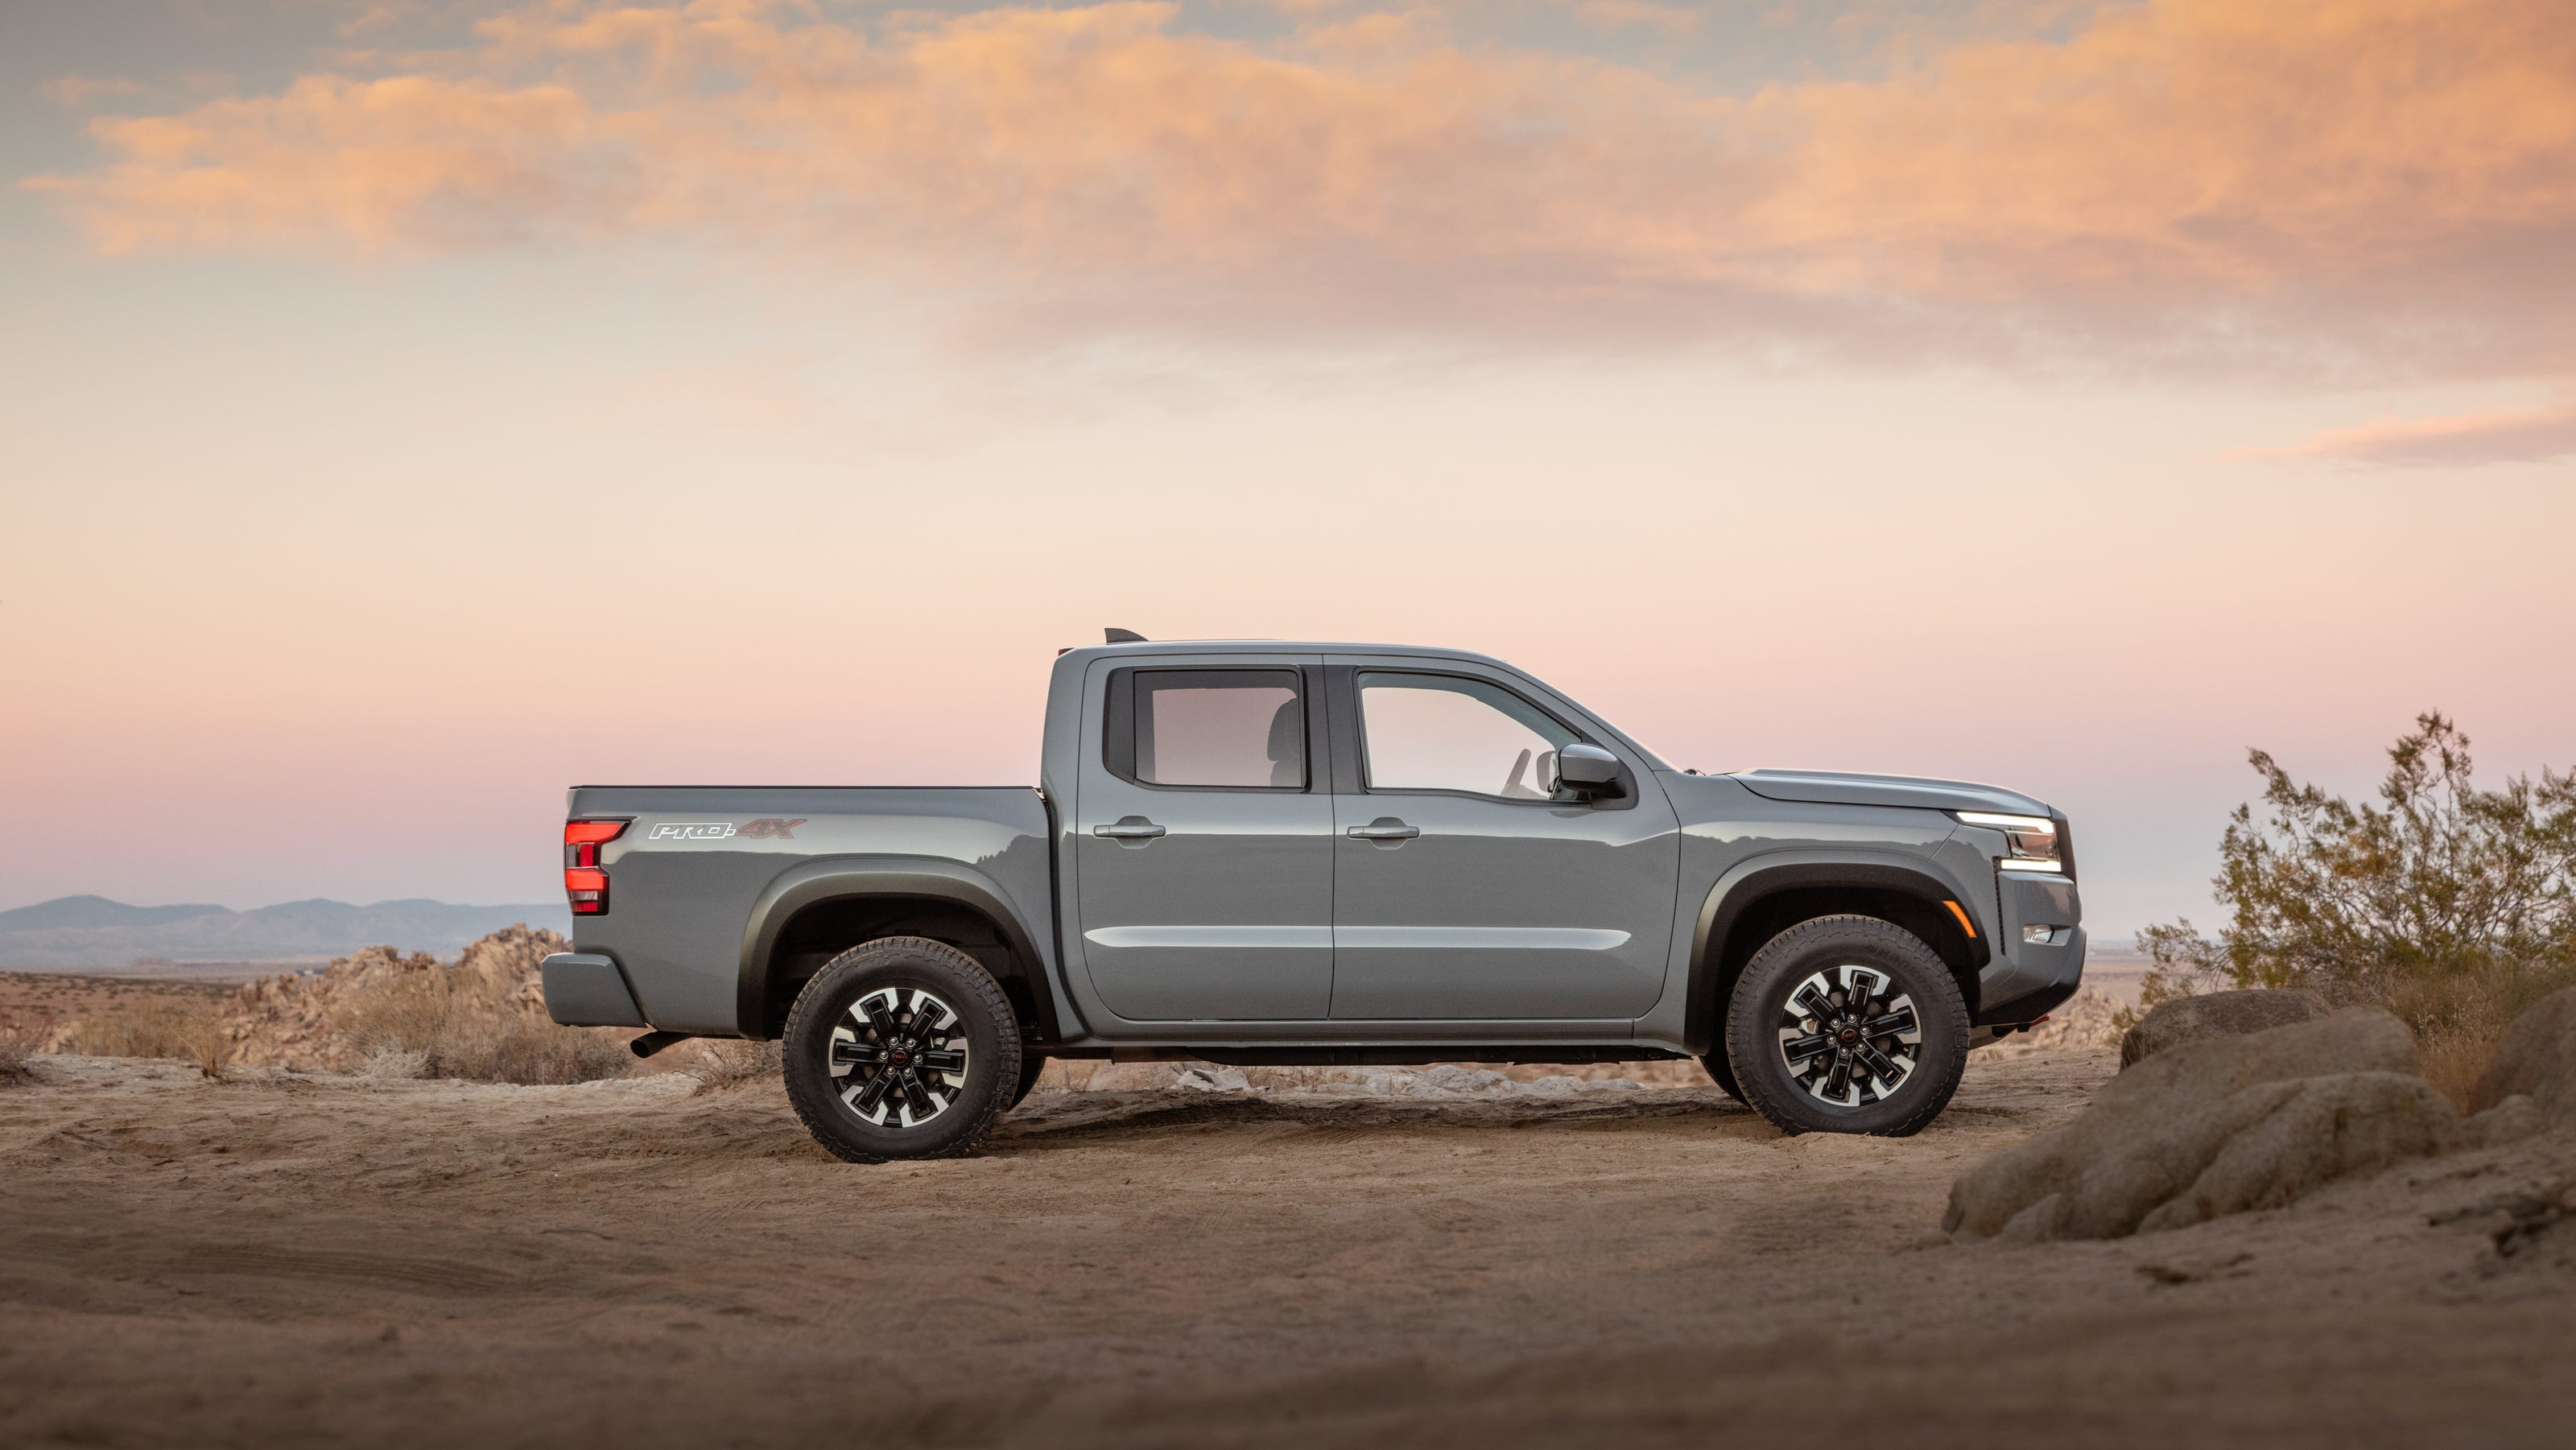 Nissan Frontier redesigned Midsize pickup gets overhaul for 2022